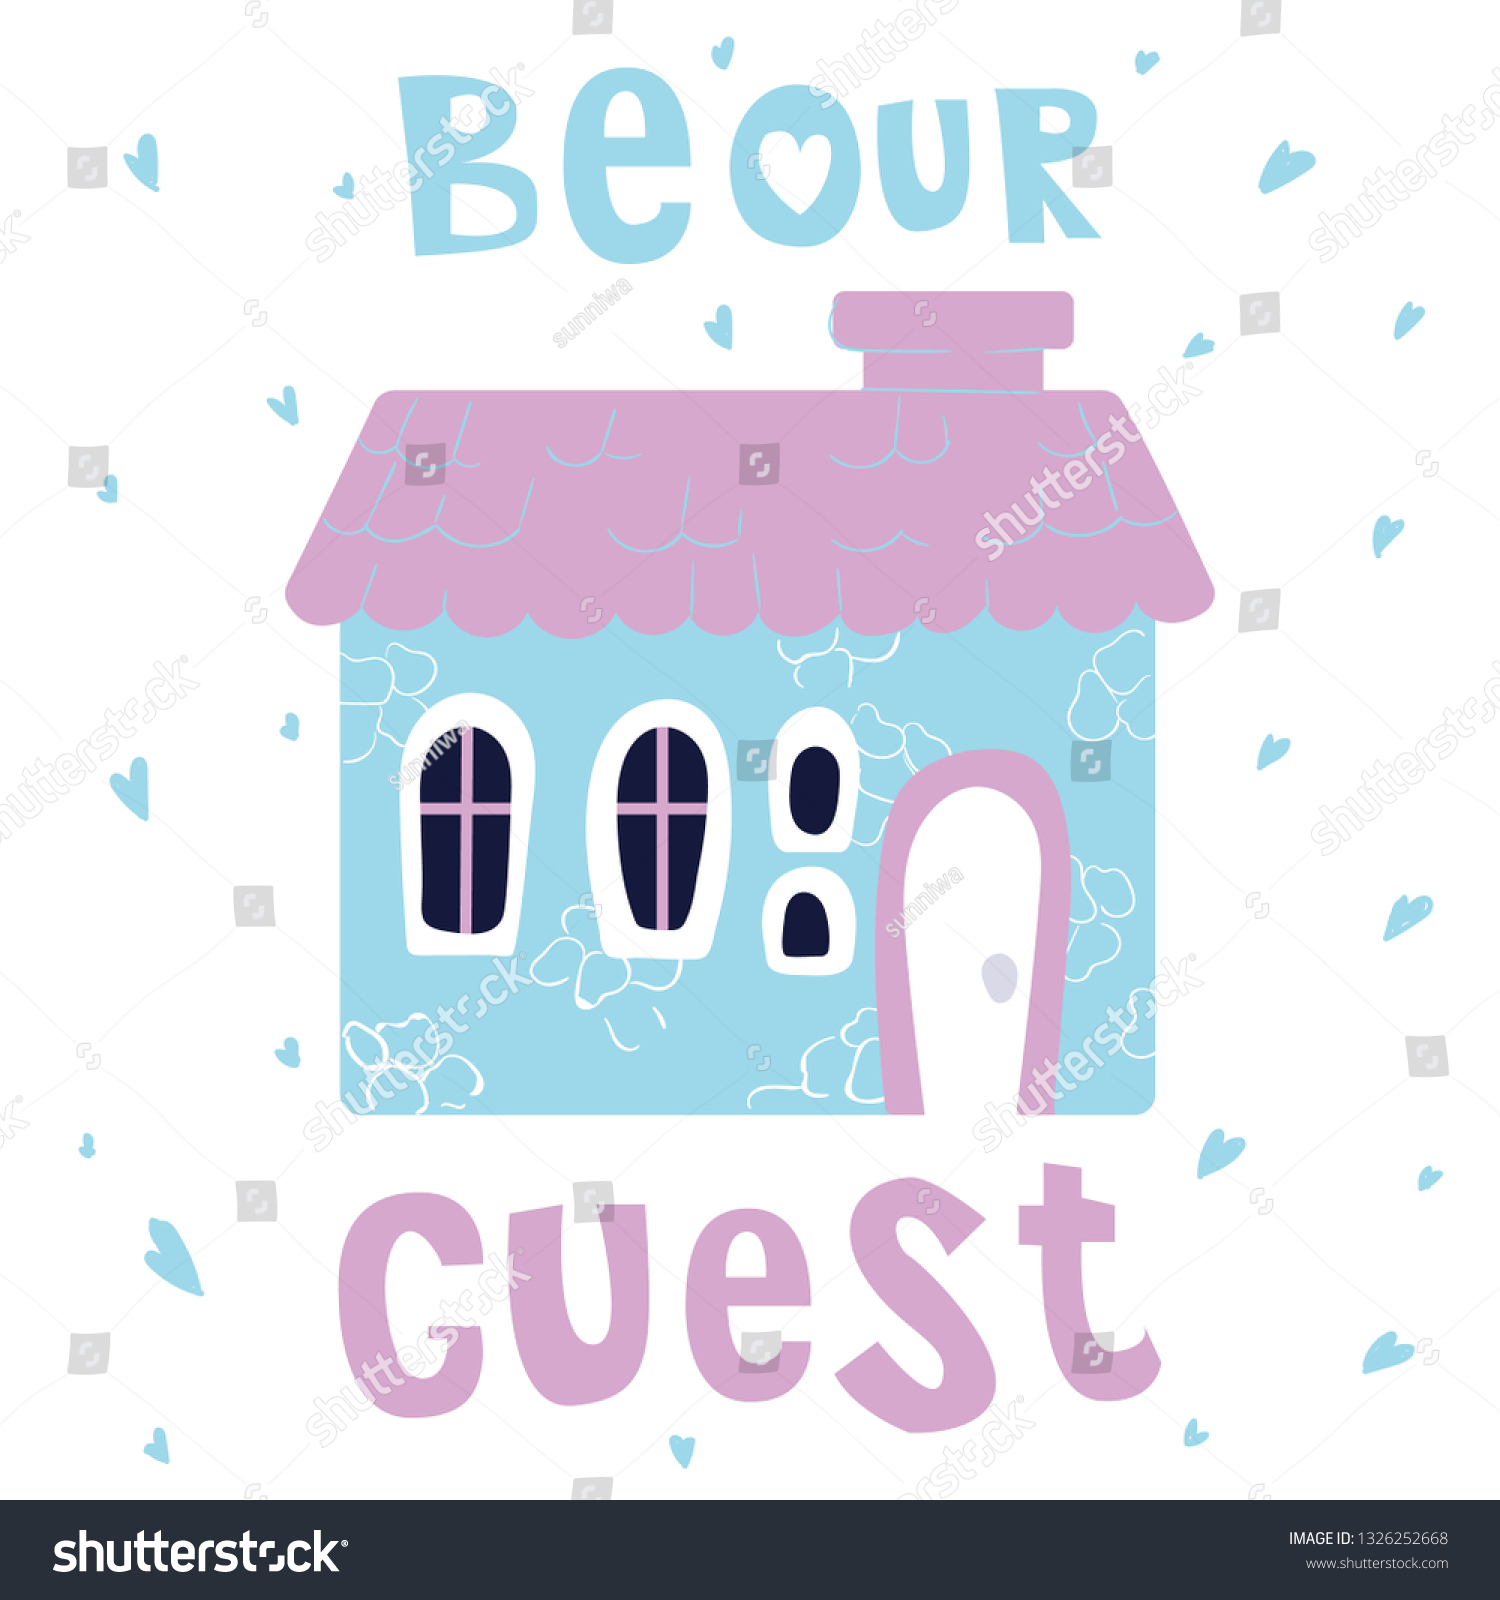 SVG of Cute cartoon house, sweet home, bright colors, lettering - be our guest. Flat vector illustration for greeting card or poster template, print svg